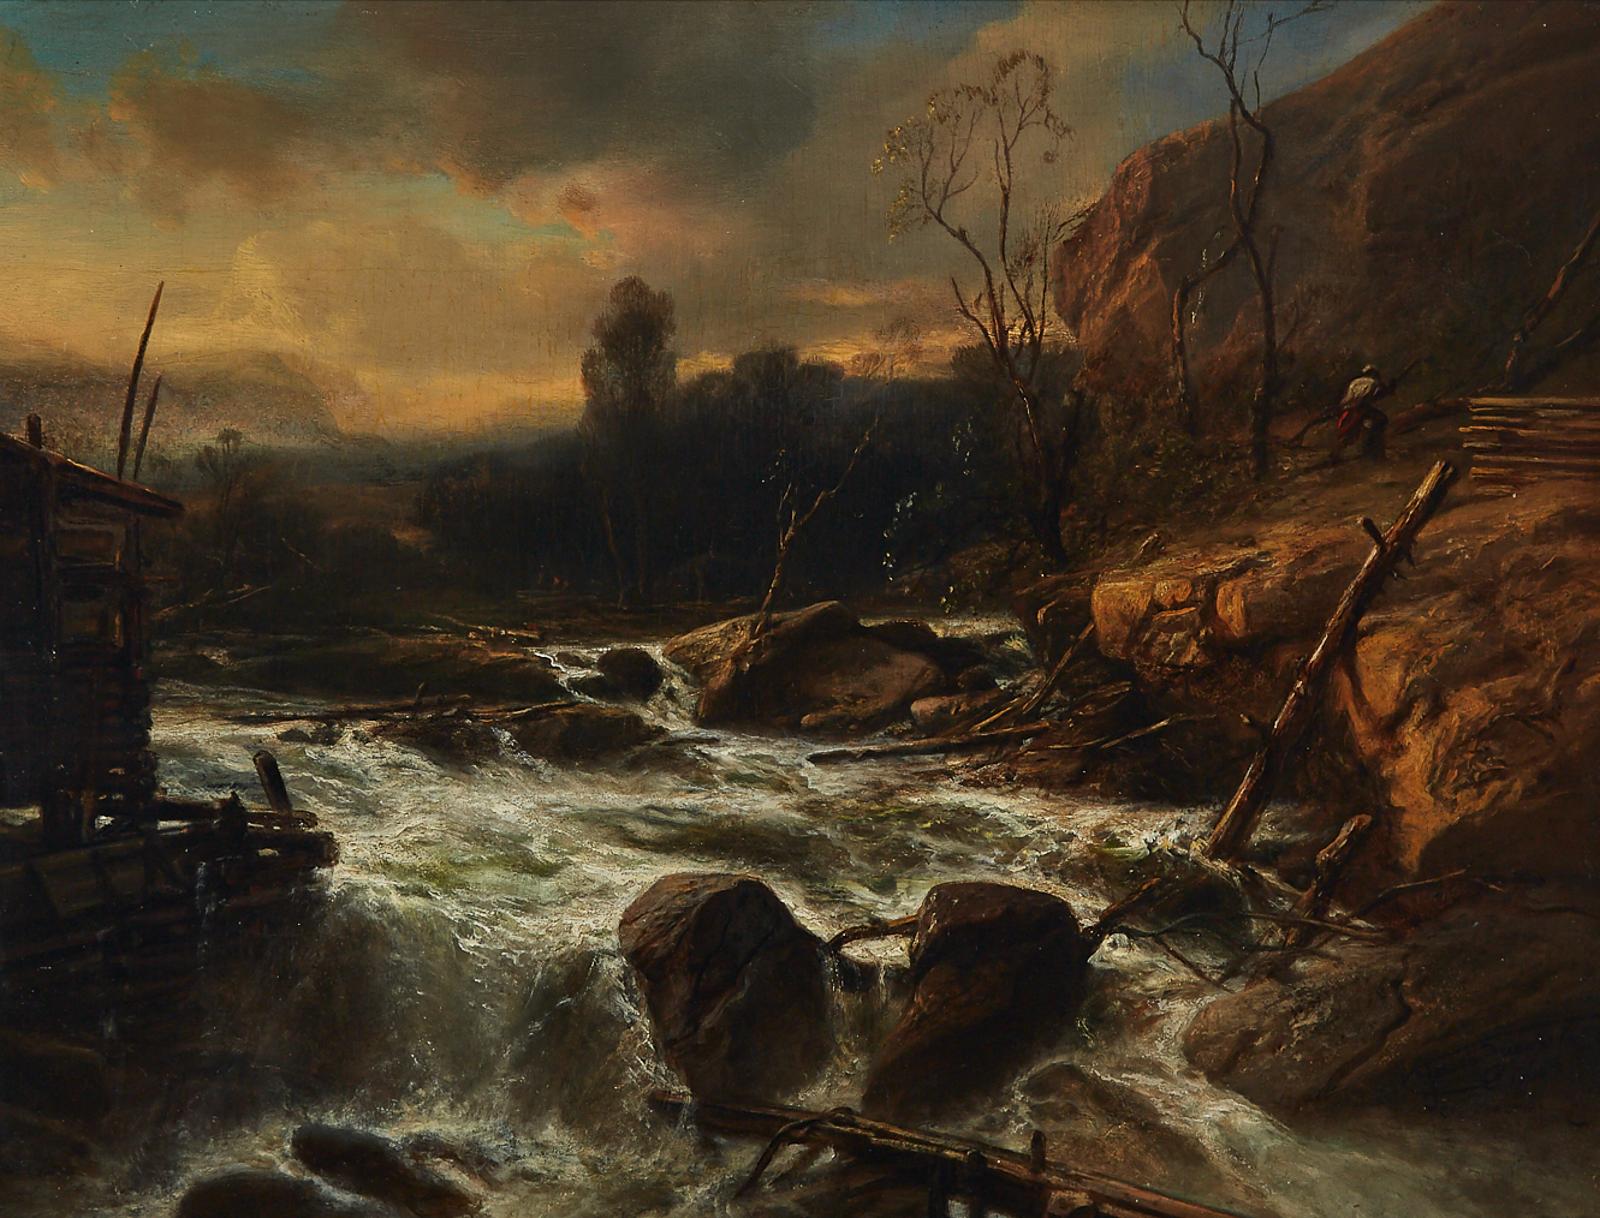 Jacob Jacobs (1812-1879) - The Broken Dam, Possibly Norway, 1860